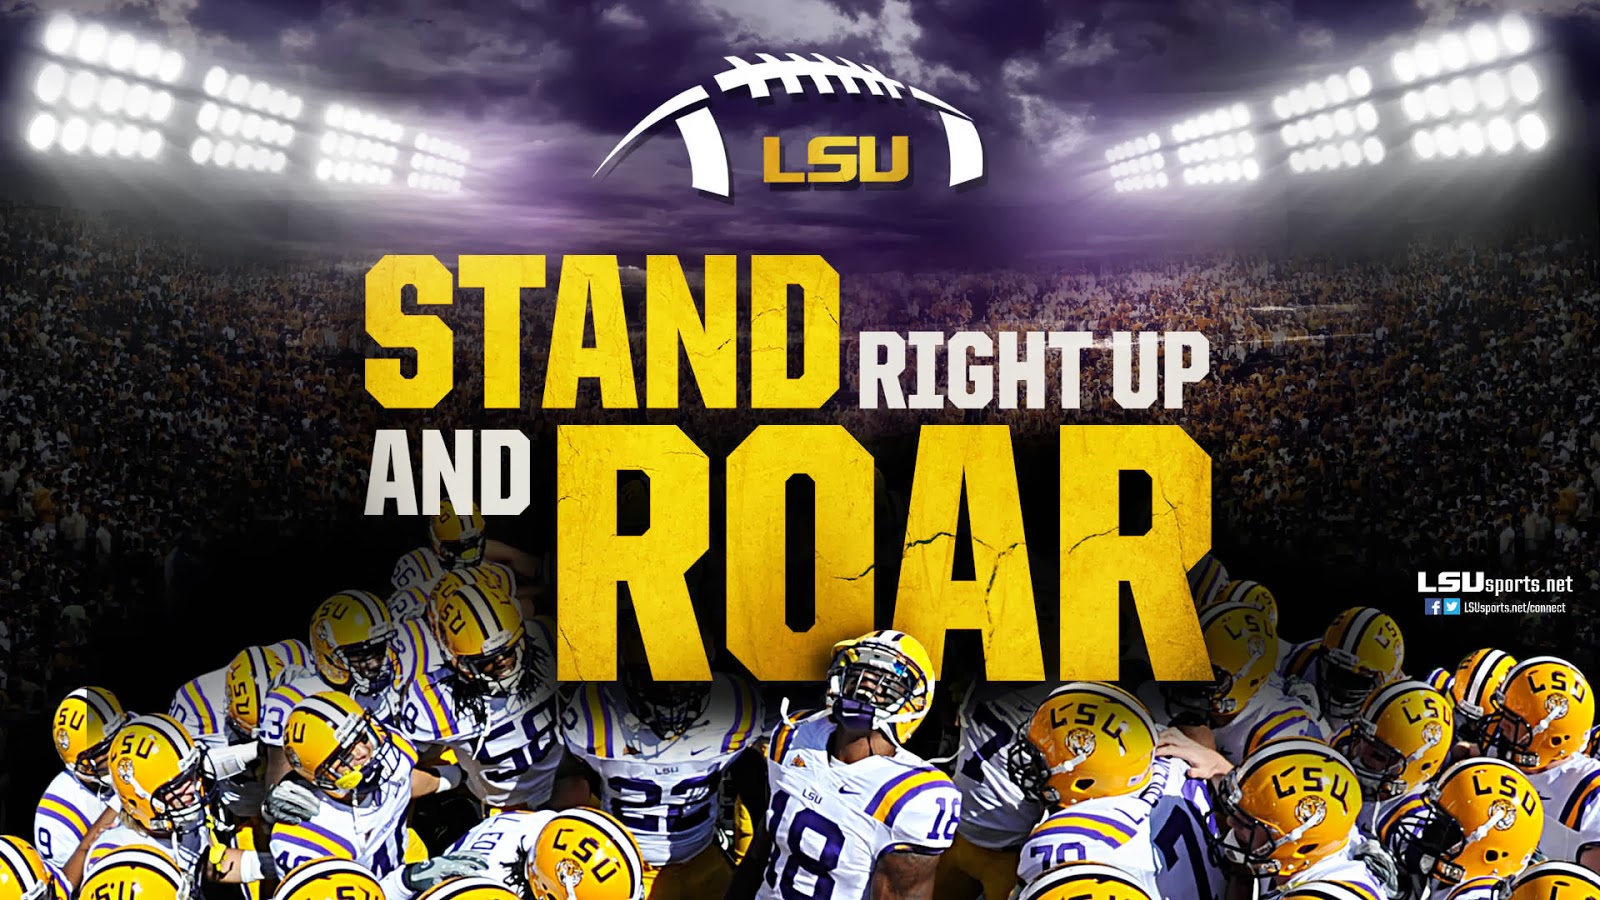 Wallpaper For Android Lsu Football